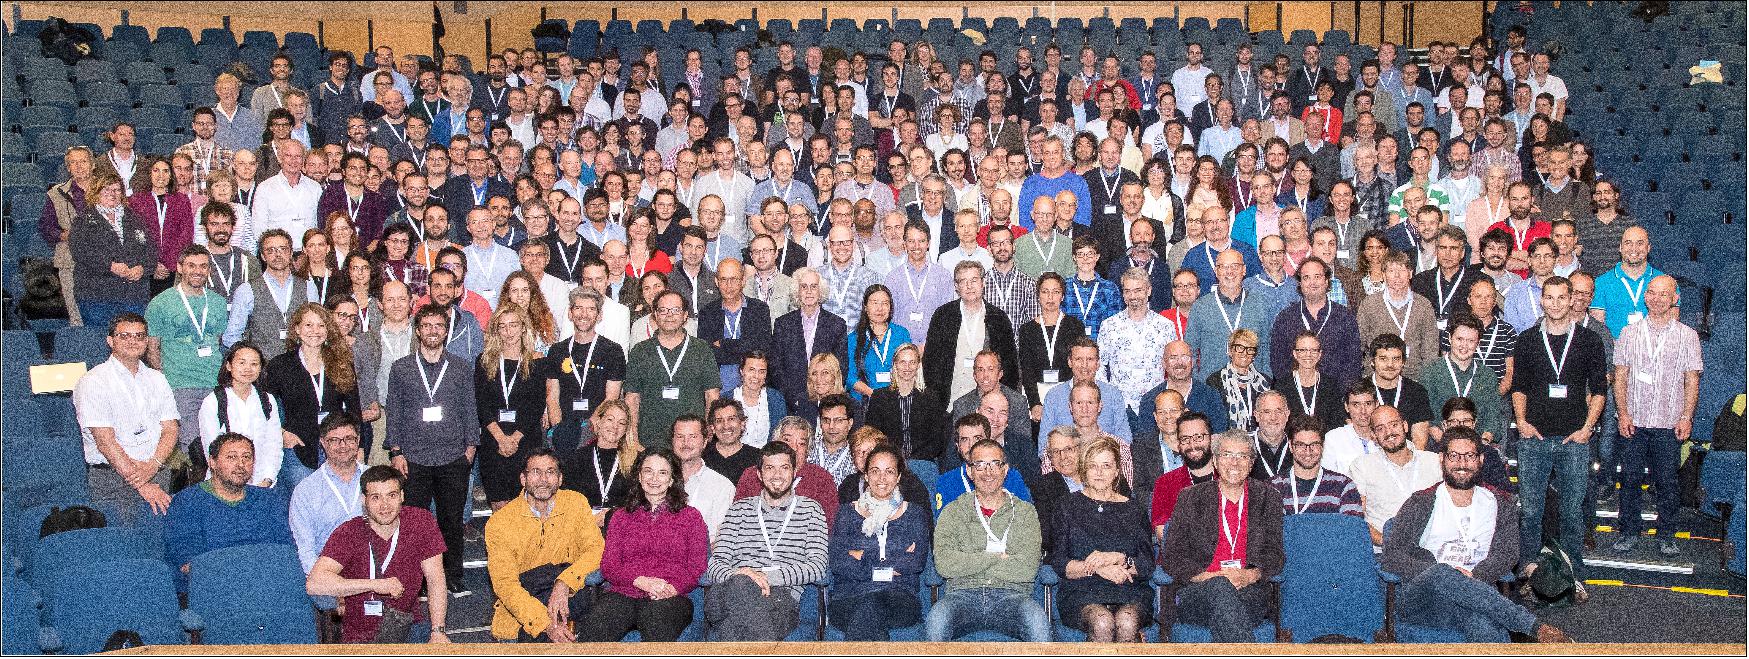 Figure 3: Members of the Euclid consortium at the Euclid Meeting in London, June 05-08, 2017, (Photo credit: LOC of the London Euclid Consortium Annual Meeting)